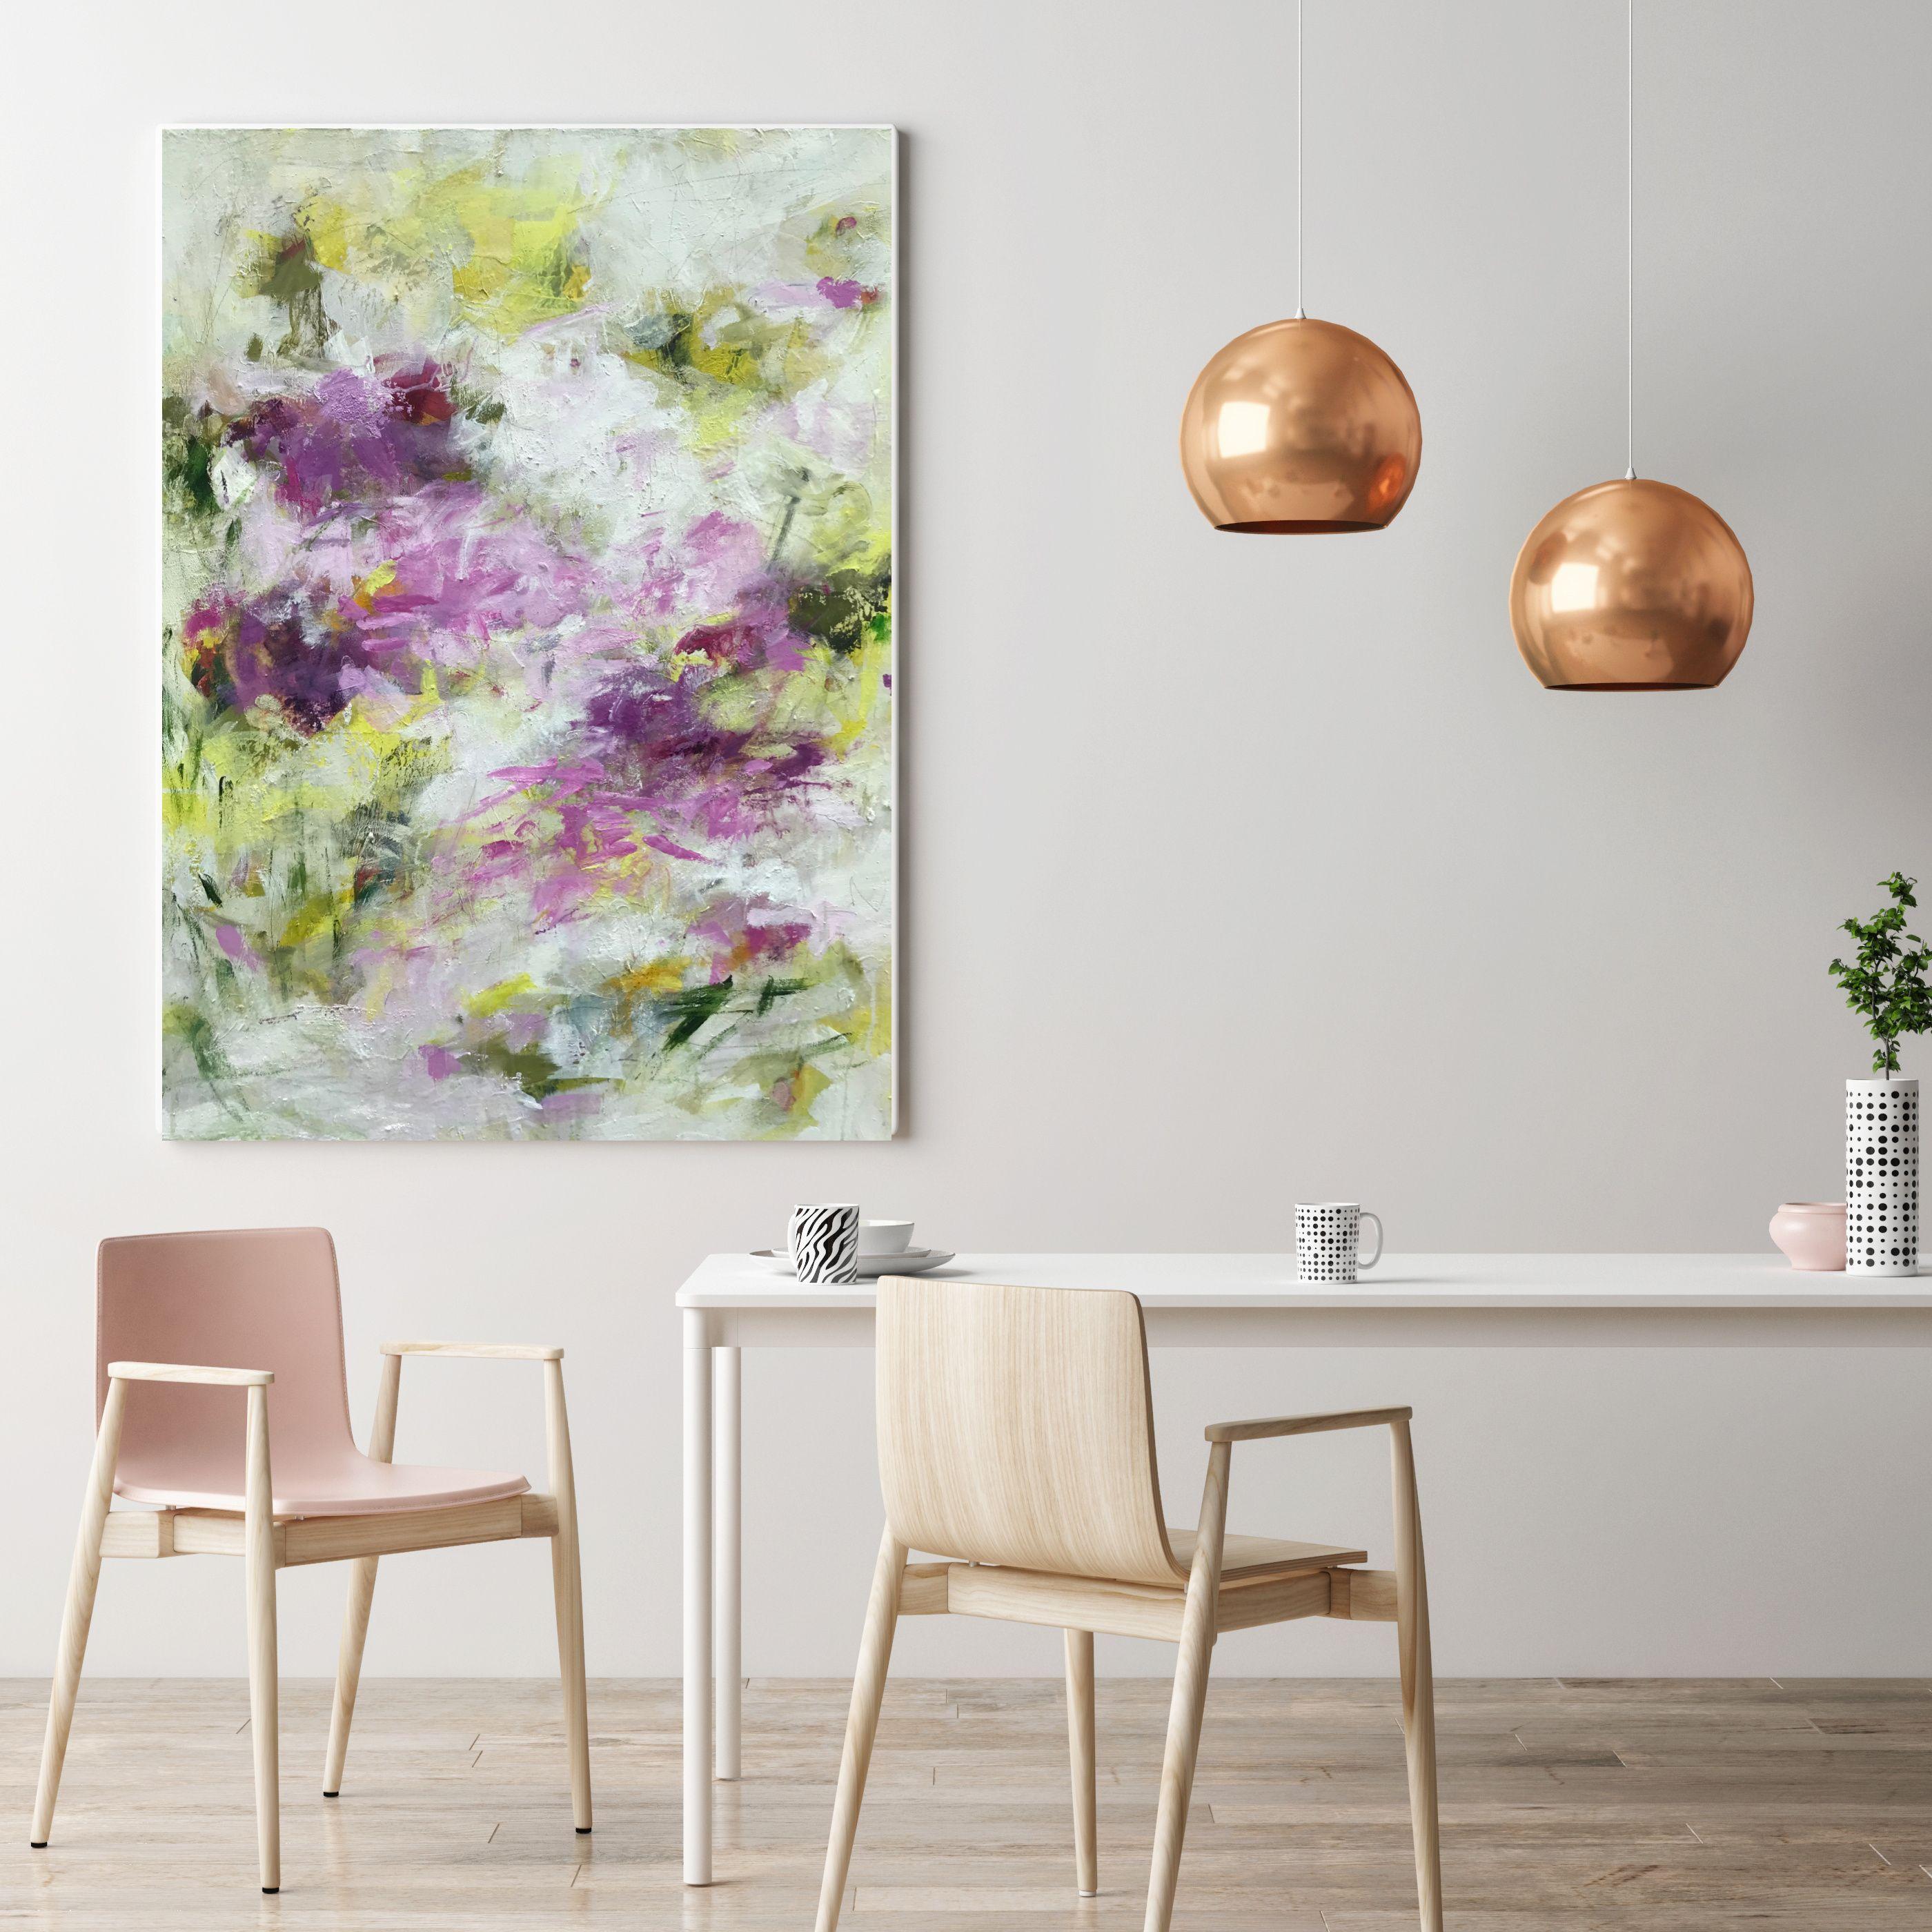 This beautifully vibrant and uplifting painting has been built over many thin layers of paint and grew out of a slow process. Its palette attempts to capture the notion of freshness and vibrancy that abounds in summer with flowers opening to greet